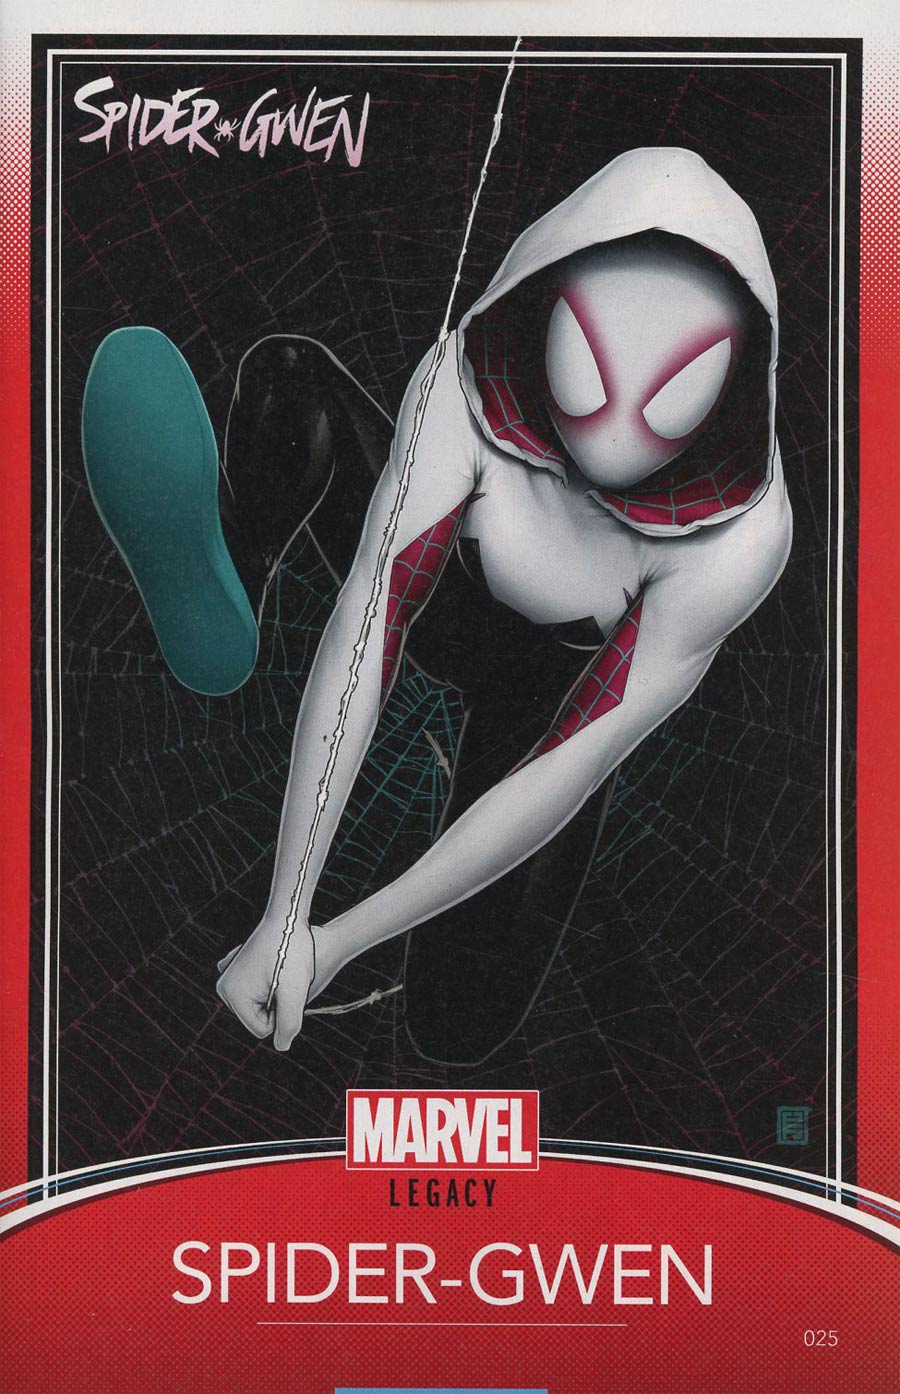 Spider-Gwen Vol 2 #25 Cover C Variant John Tyler Christopher Trading Card Cover (Marvel Legacy Tie-In)